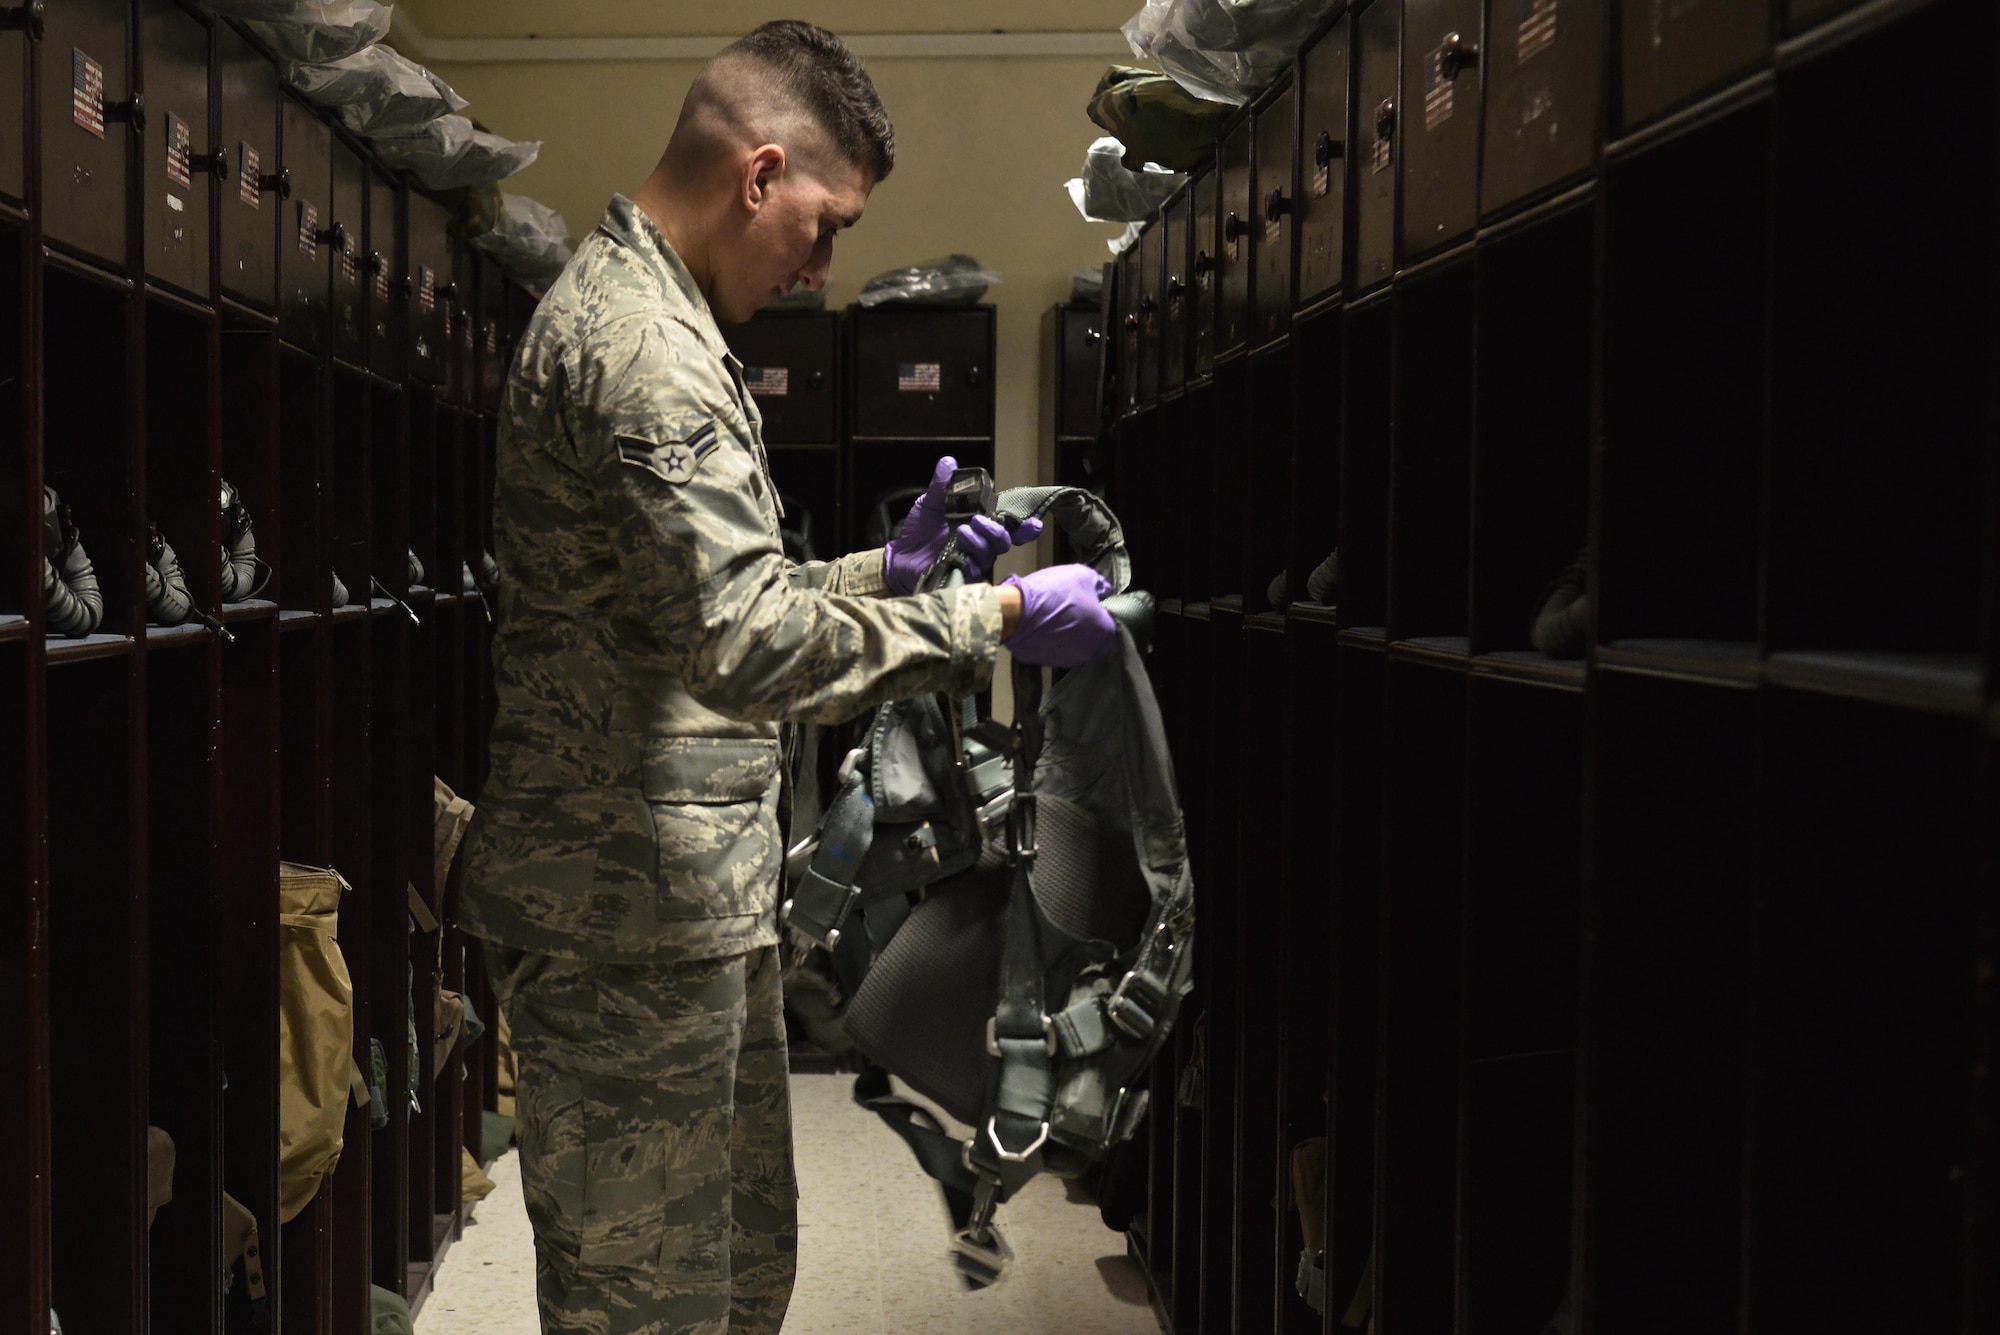 Airman 1st Class Andrew Gonzalez, 379th Expeditionary Operations Support Squadron Aircrew Flight Equipment, checks a harness for loose strings, tabs and tears before making requested adjustments from the aircrew July 29, 2015 at Al Udeid Air Base, Qatar. AFE airmen are responsible for helmet harnesses, life preservers and parachutes. They also ensure aircrew members are properly armed prior to takeoff and clear them after each mission. (U.S. Air Force photo/Staff Sgt. Alexandre Montes)